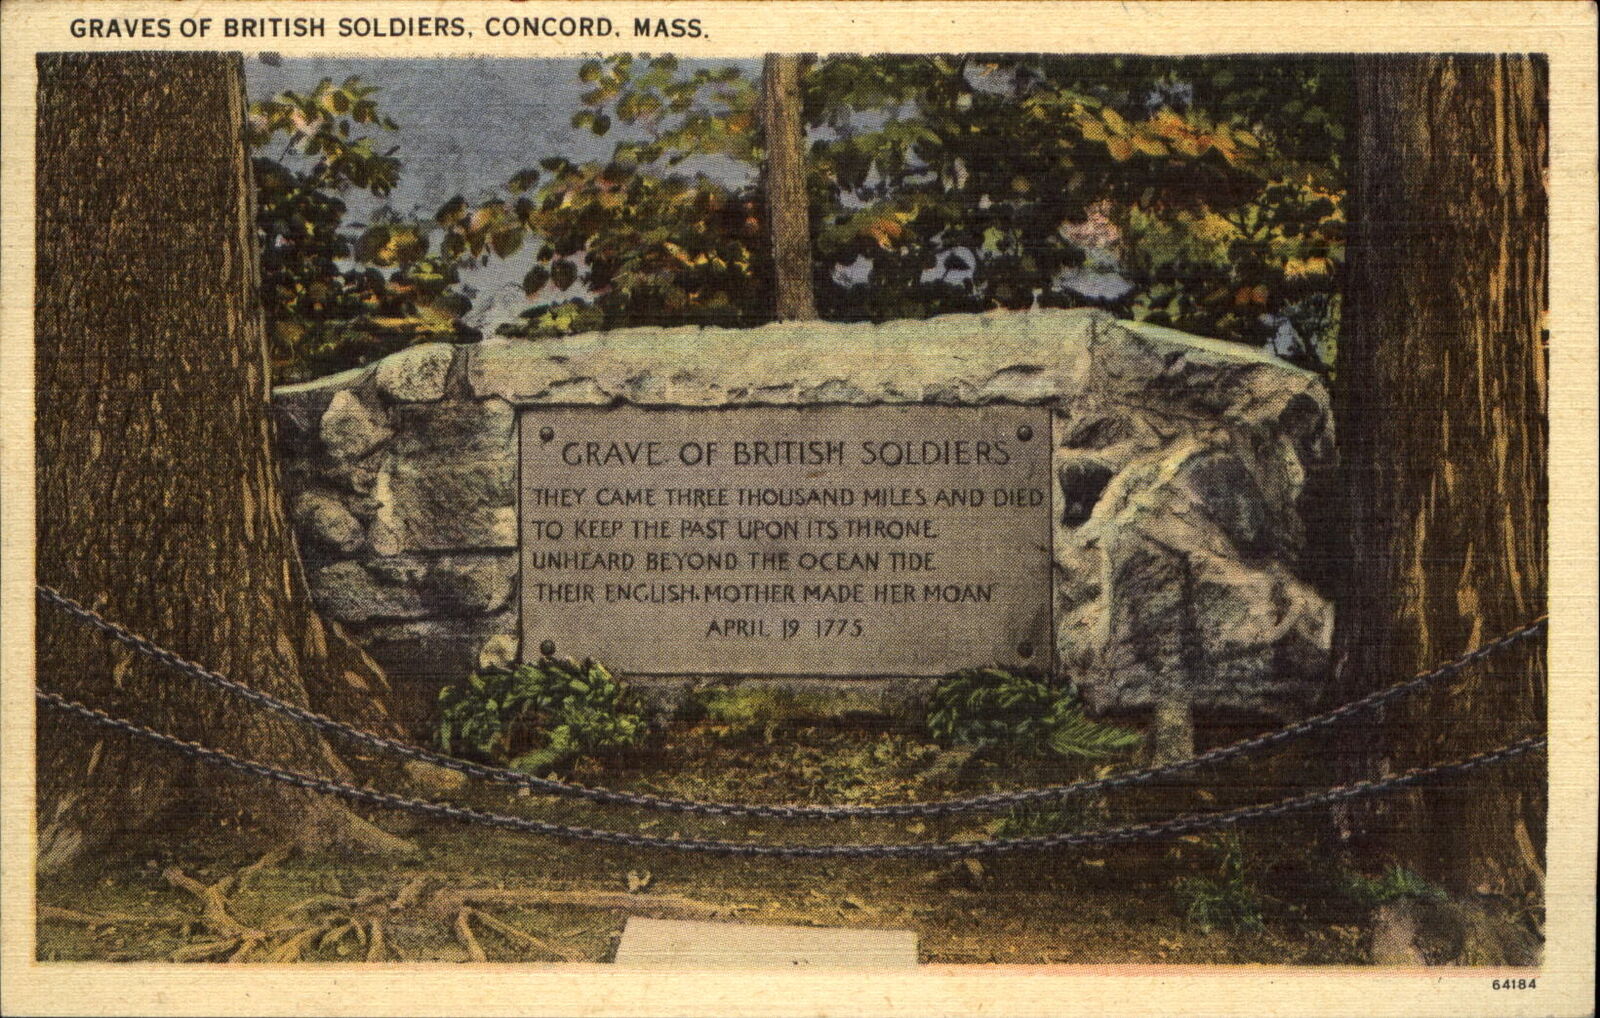 Graves of British Soldiers Concord Massachusetts MA mailed 1951